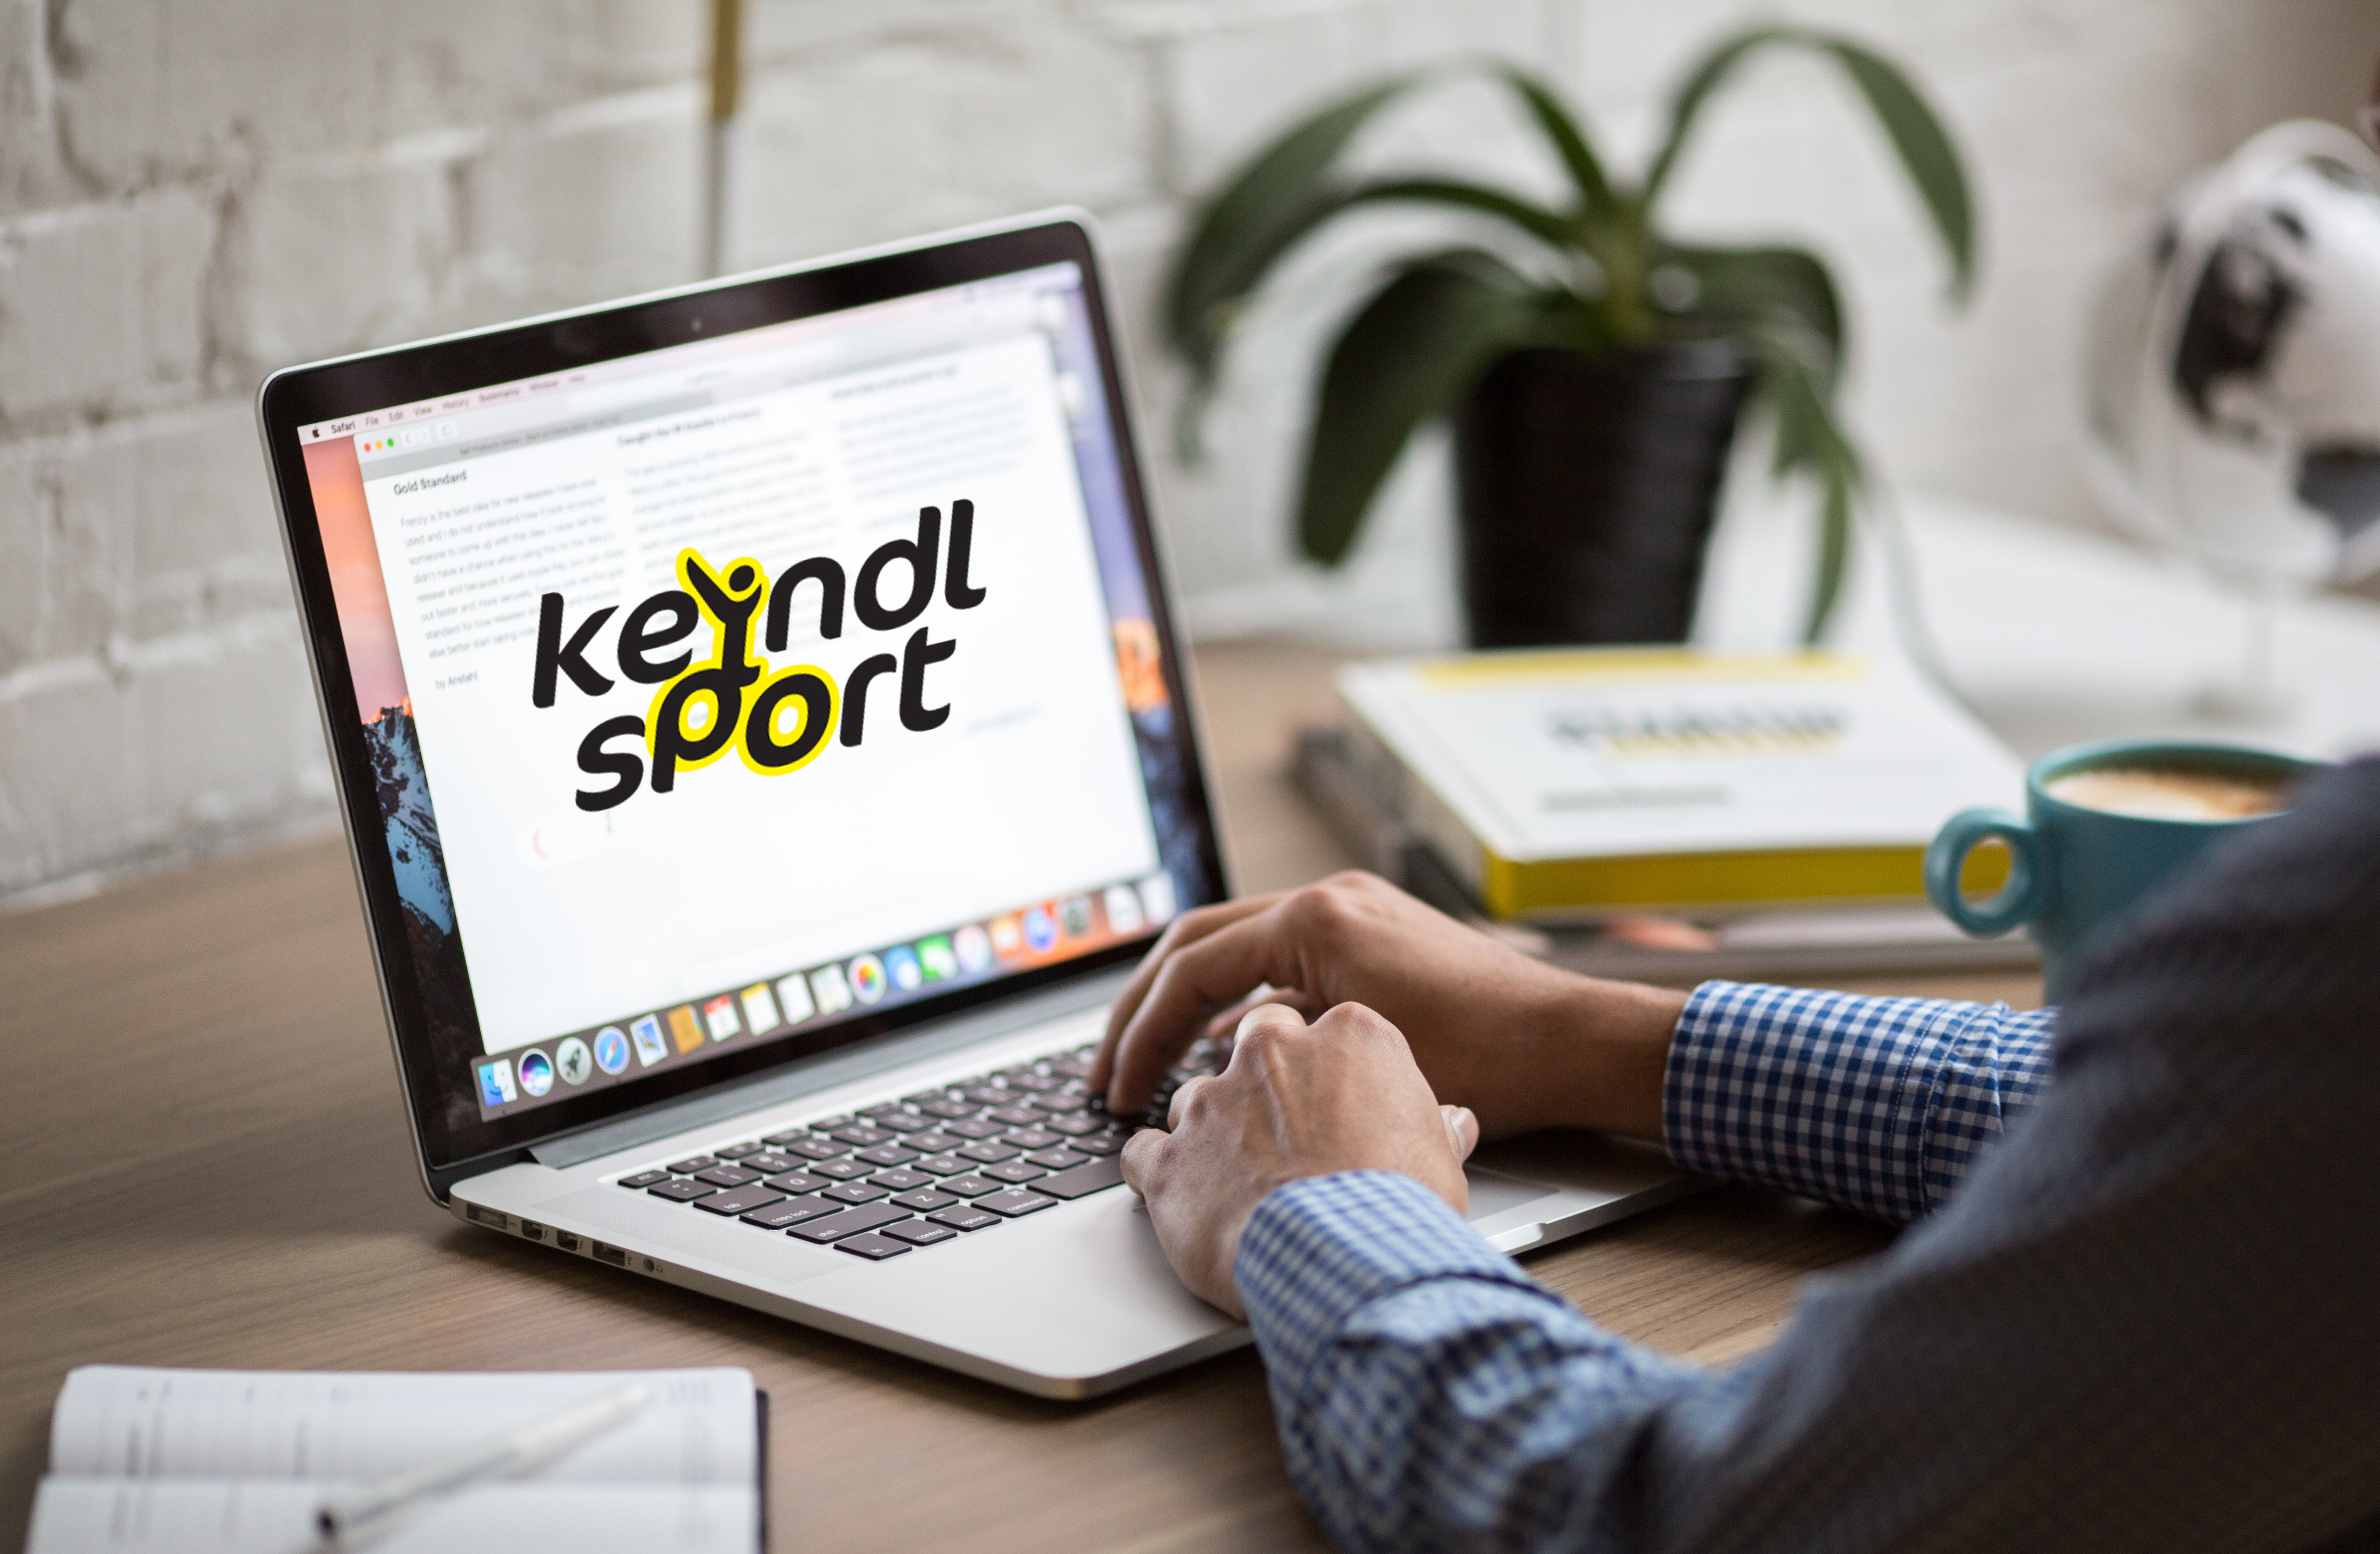 KEINDL SPORT – NEW NAME ON OUR CLIENT LIST